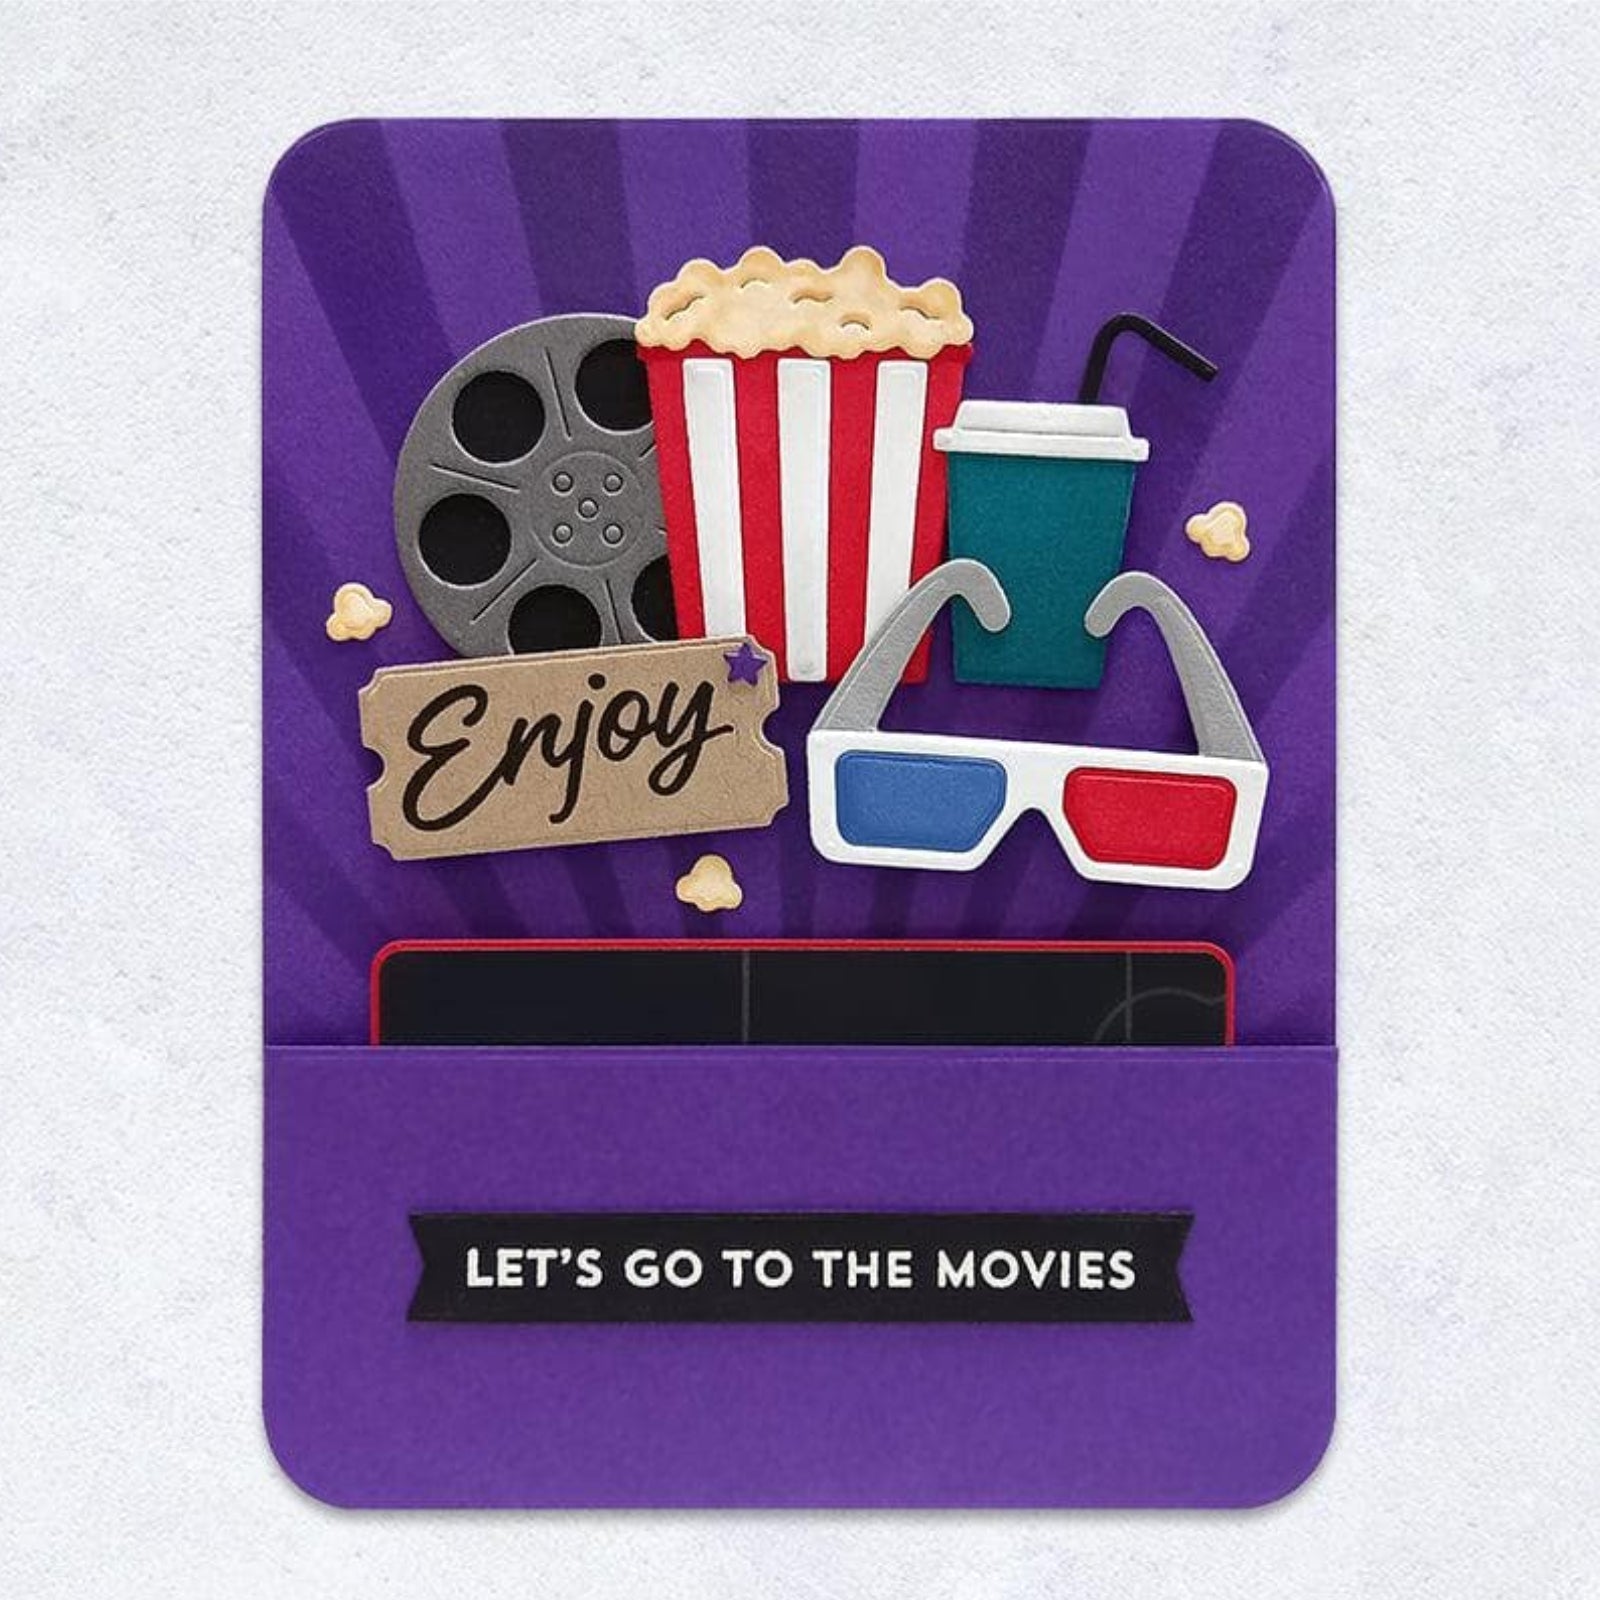 Movie Night Picture Perfect Cutting Dies & Stamps Set